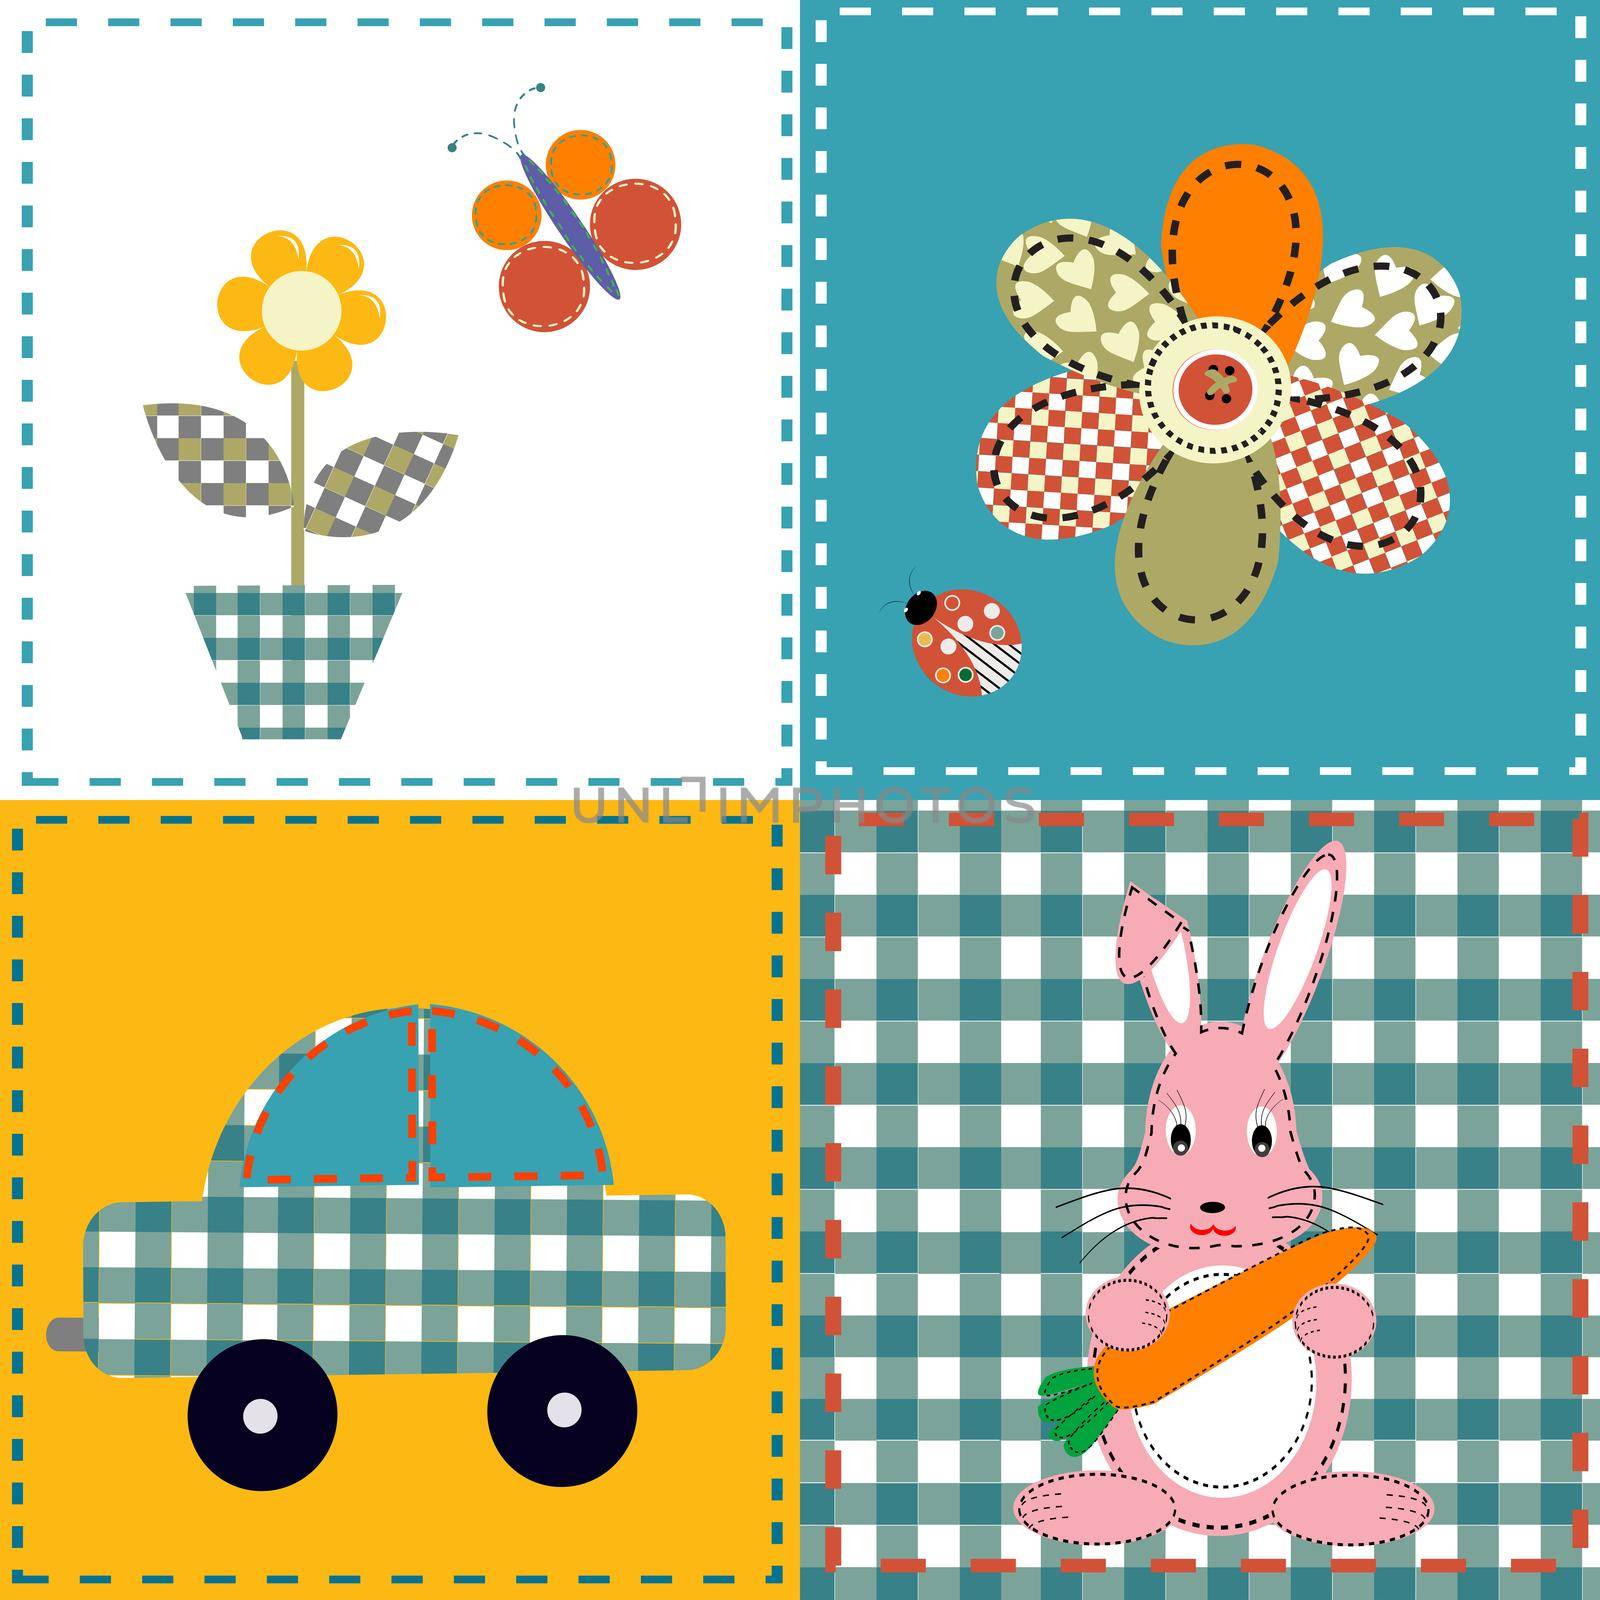 Patchwork design with bunny, car and flowers by hibrida13